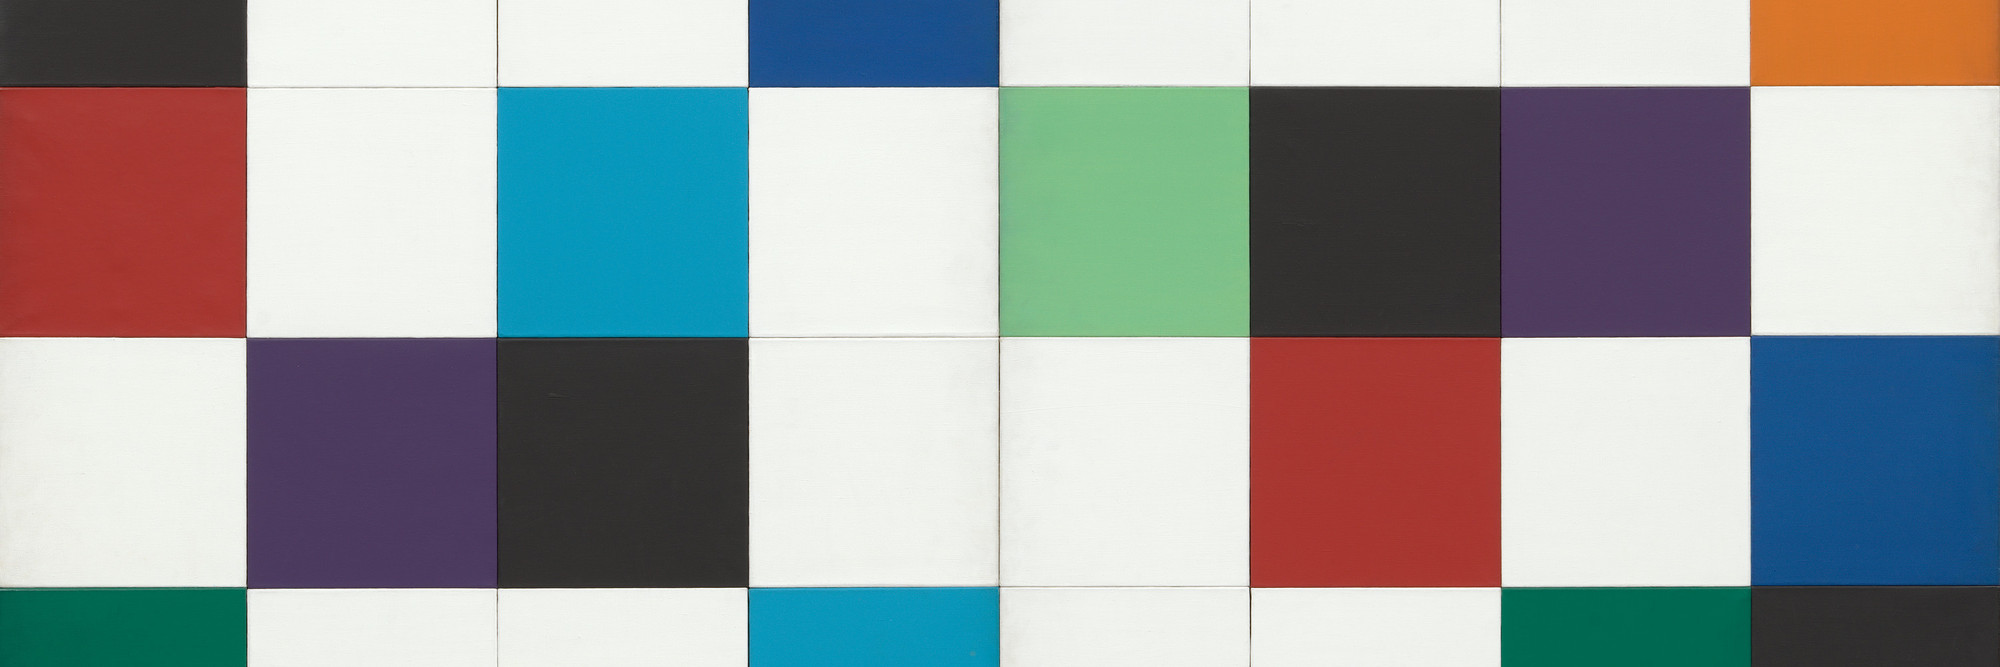 Ellsworth Kelly. Colors for a Large Wall. 1951. Oil on canvas, sixty-four panels. 7&#39; 10 1/2&#34; x 7&#39; 10 1/2&#34; (240 x 240 cm). Gift of the artist. © 2018 Ellsworth Kelly